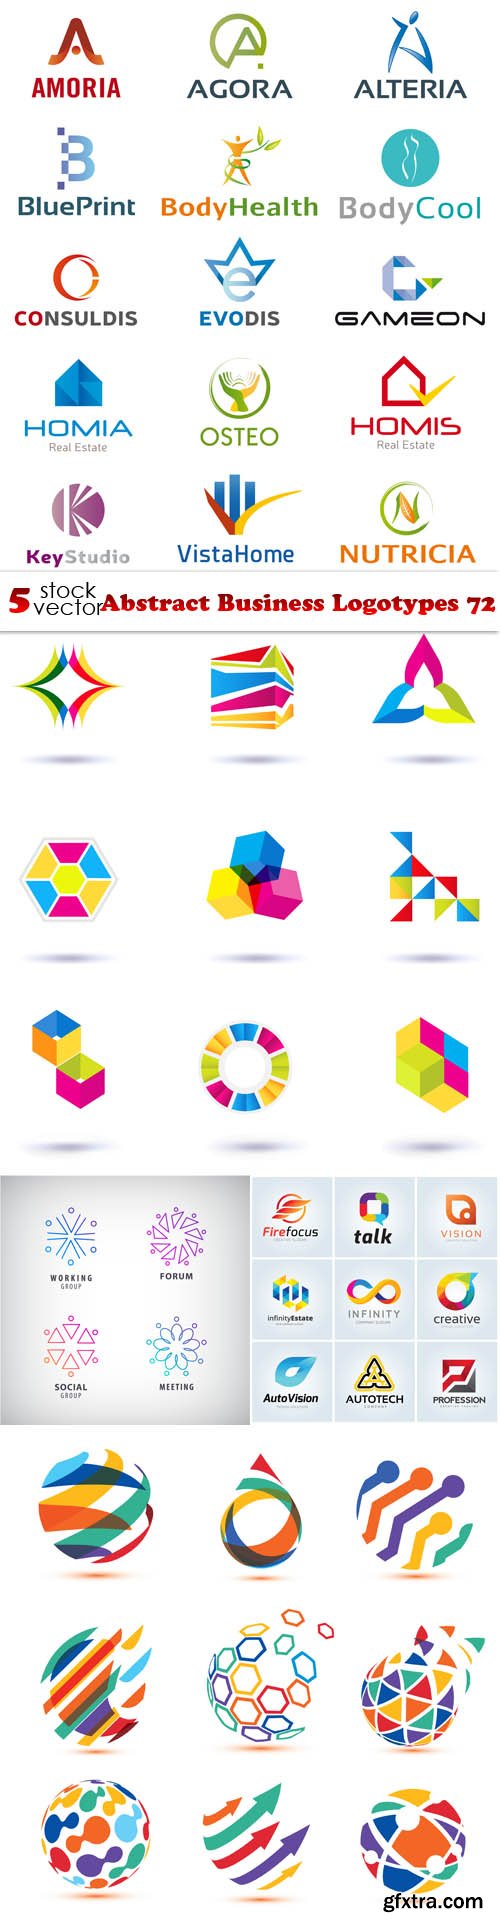 Vectors - Abstract Business Logotypes 72